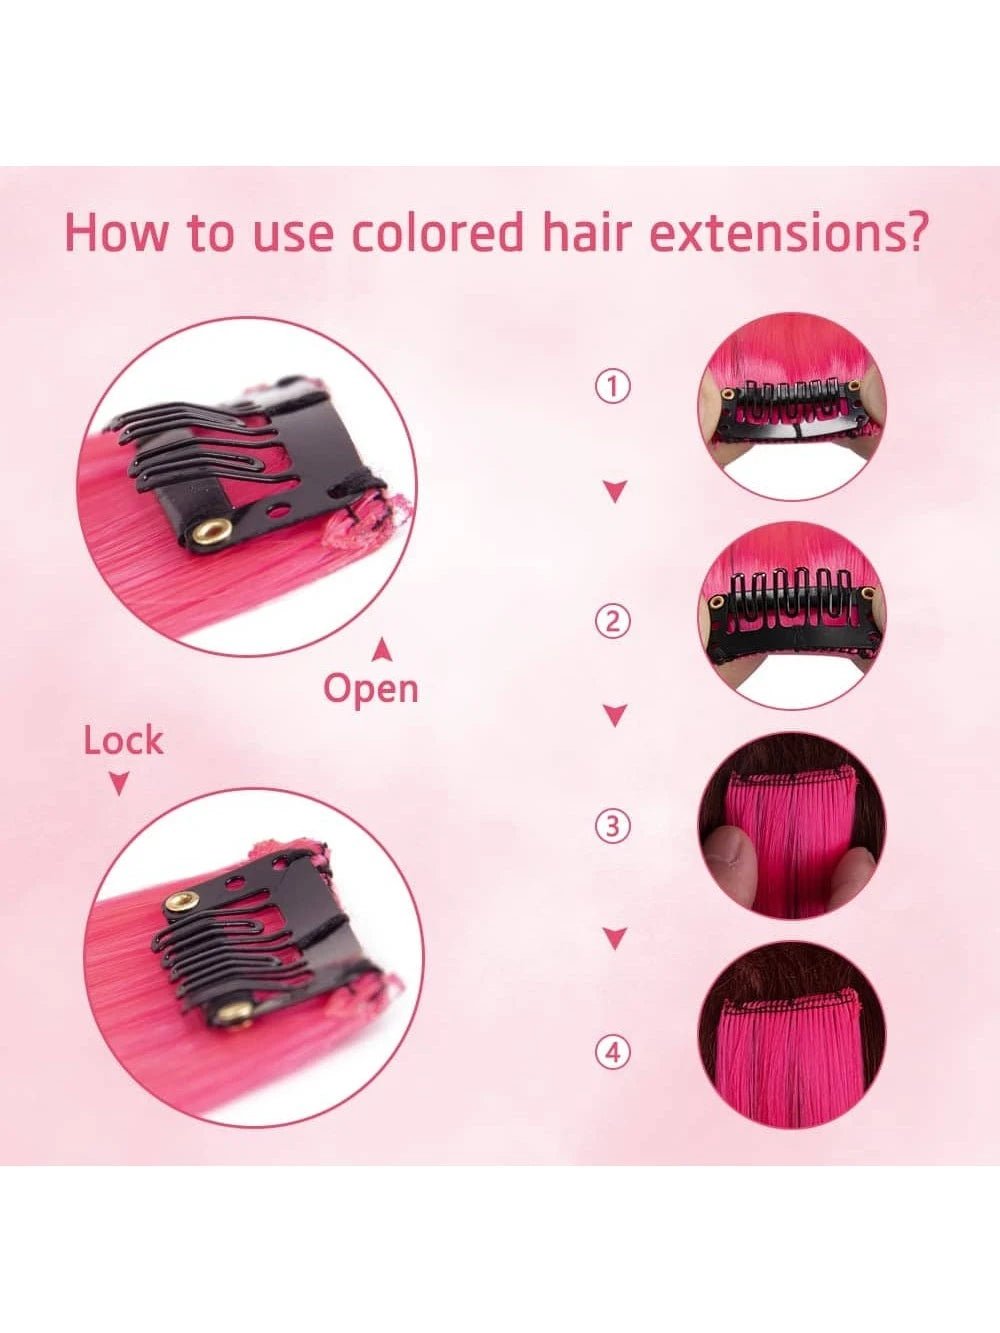 10pcs Multi-Color Highlights 20 Inch Clip In Synthetic Hair Extensions For Party - Negative Apparel